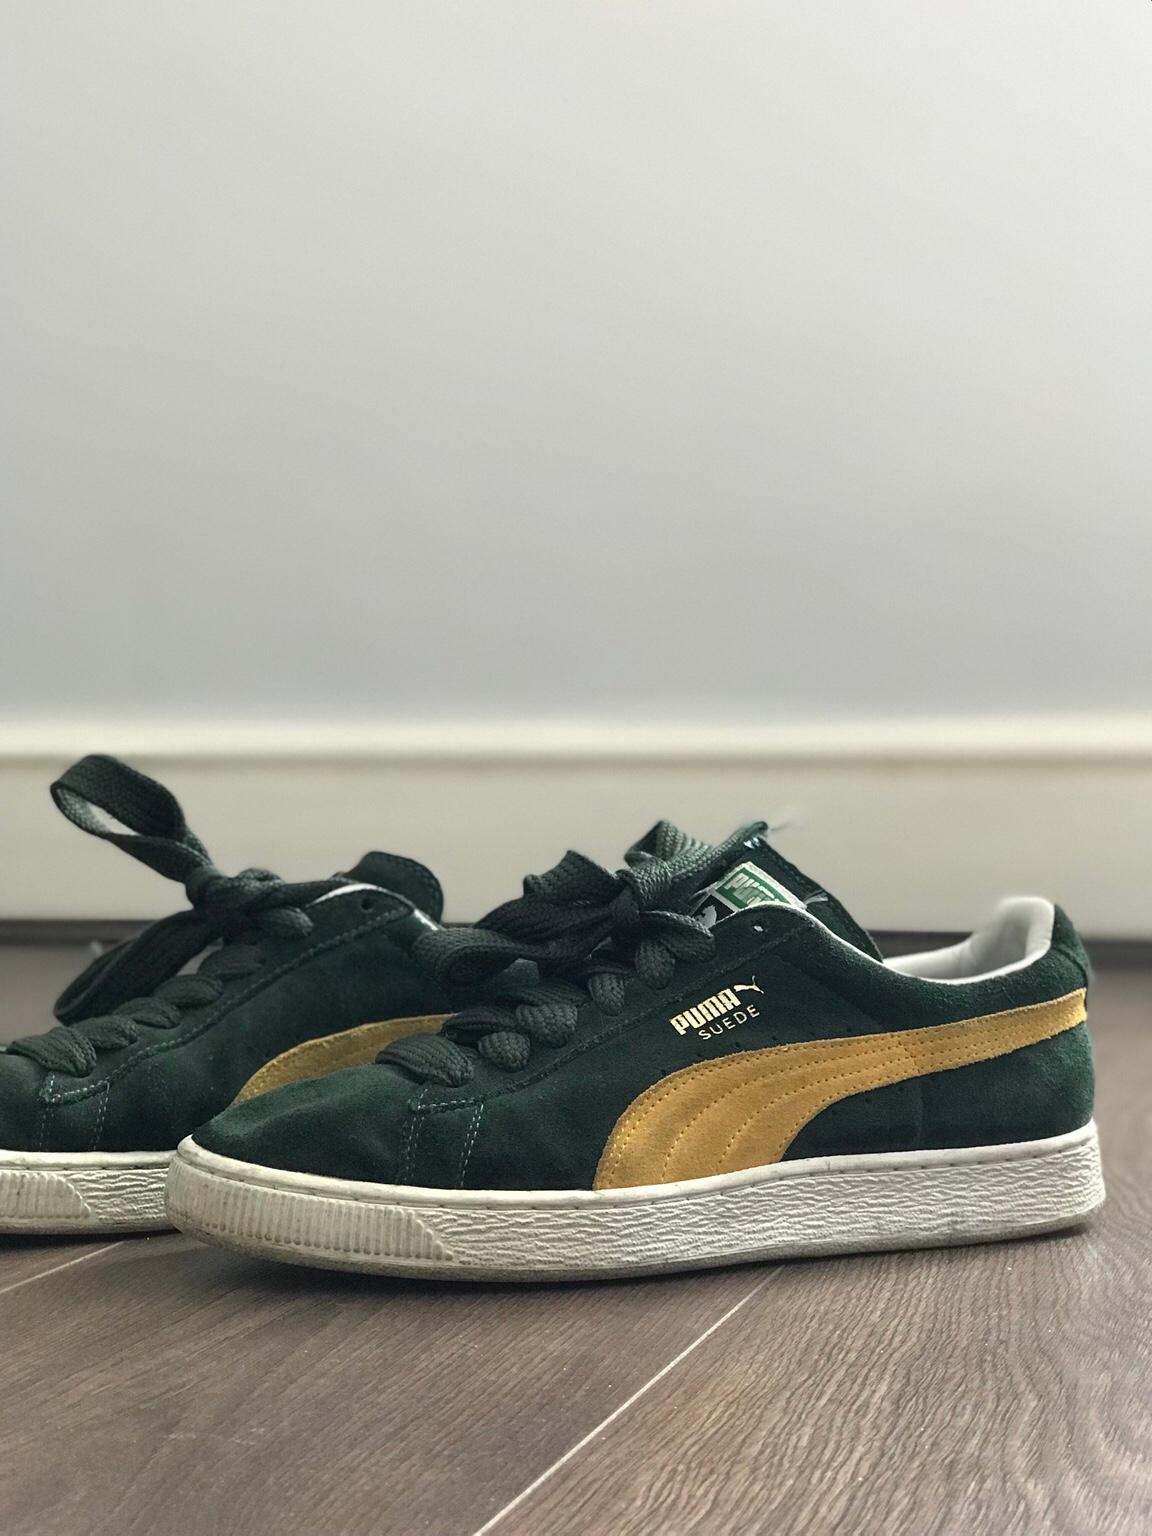 SUEDE PUMA TRAINERS - (DARK GREEN / SIZE 7) in RG2 Church for £15.00 ...